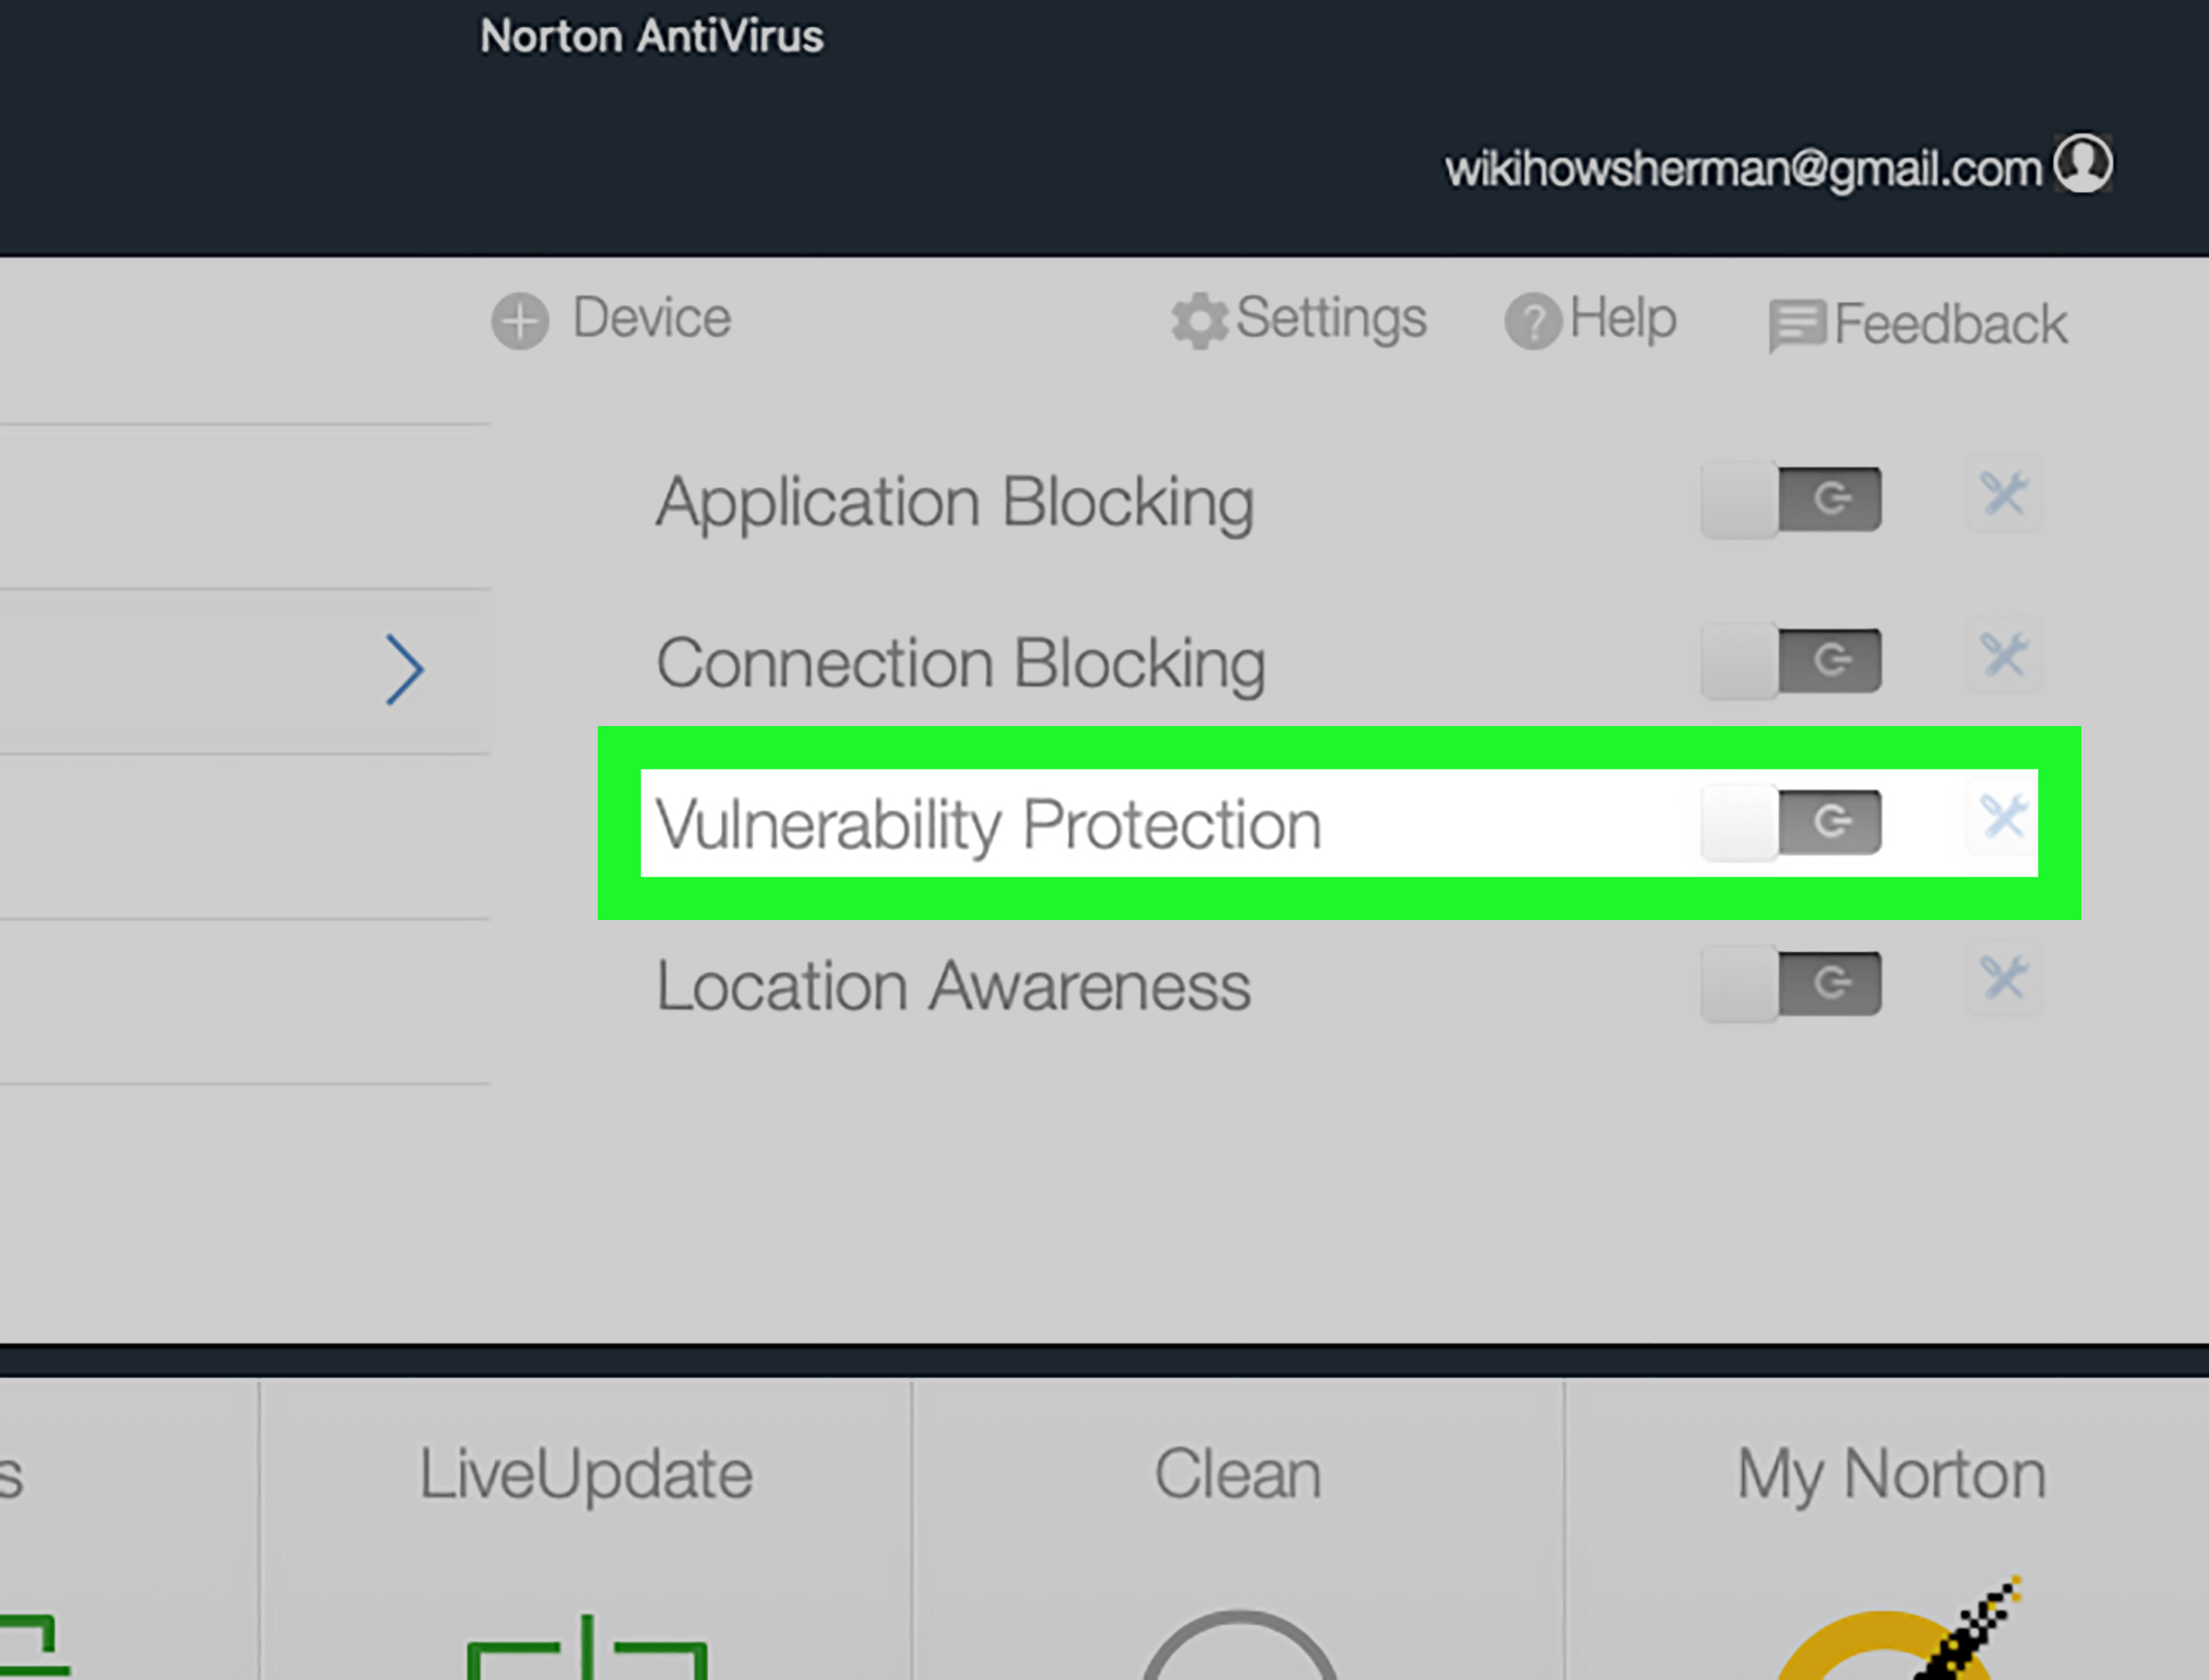 Open your antivirus or firewall software
Locate the option to temporarily disable the protection